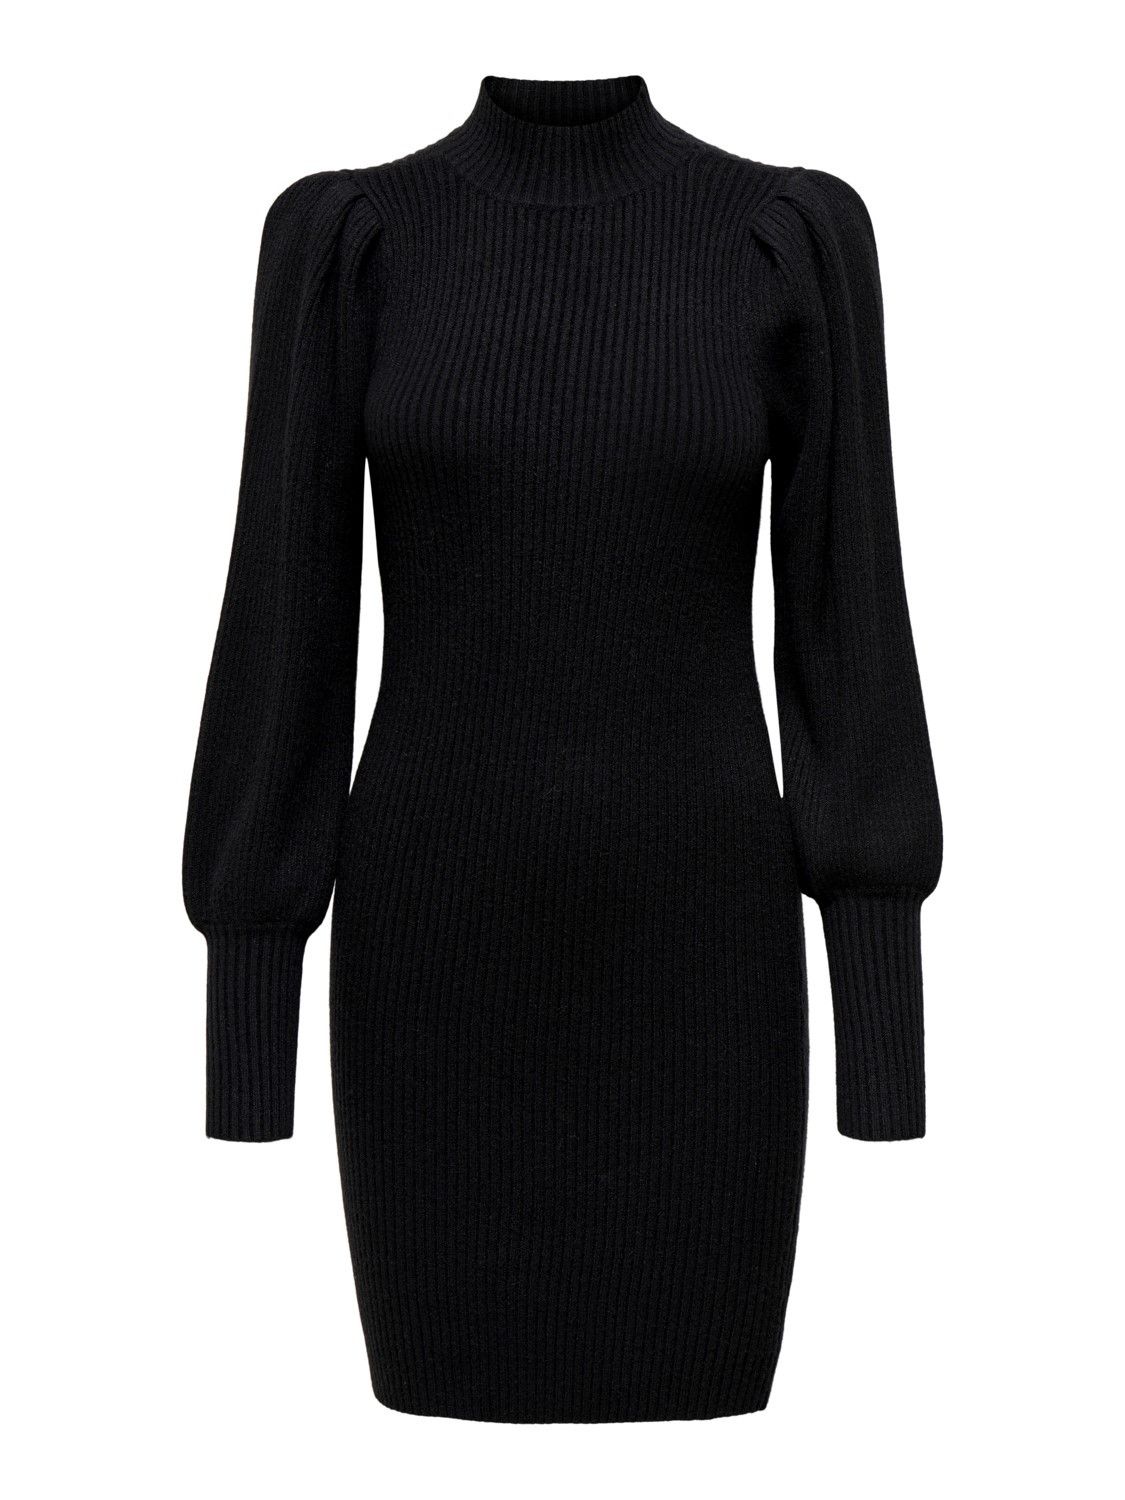 Brand: Only Gender: Women Type: Dresses Season: Fall/Winter  PRODUCT DETAIL • Color: black • Sleeves: long • Neckline: turtleneck  COMPOSITION AND MATERIAL • Composition: -27% nylon -23% polyester -50% viscose  •  Washing: machine wash at 30°